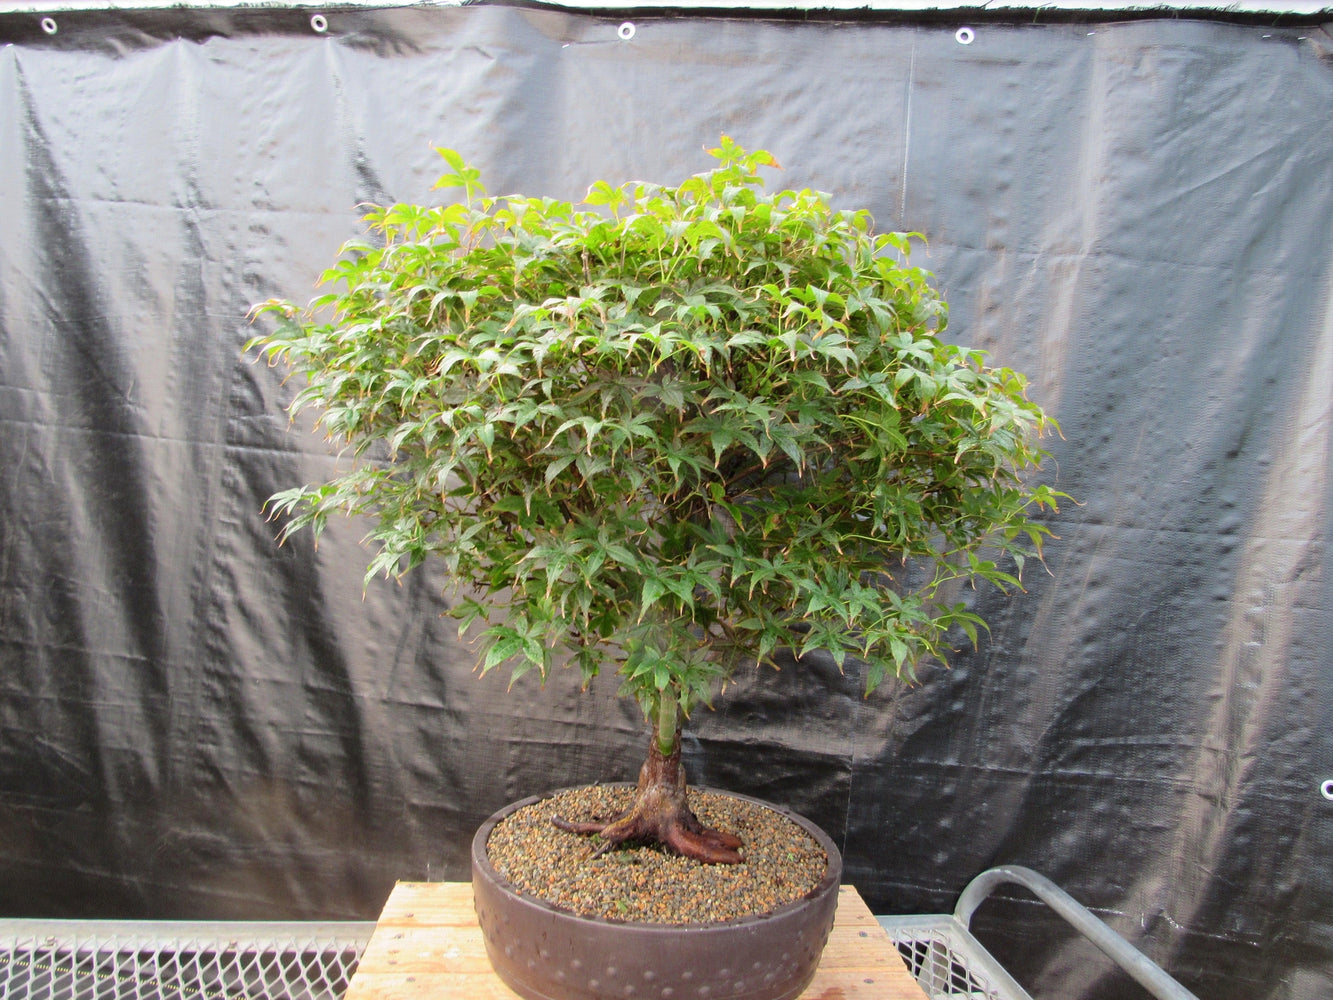 51 Year Old Rhode Island Red Japanese Maple Bonsai Tree51 Year Old Rhode Island Red Japanese Maple Bonsai Tree Profile